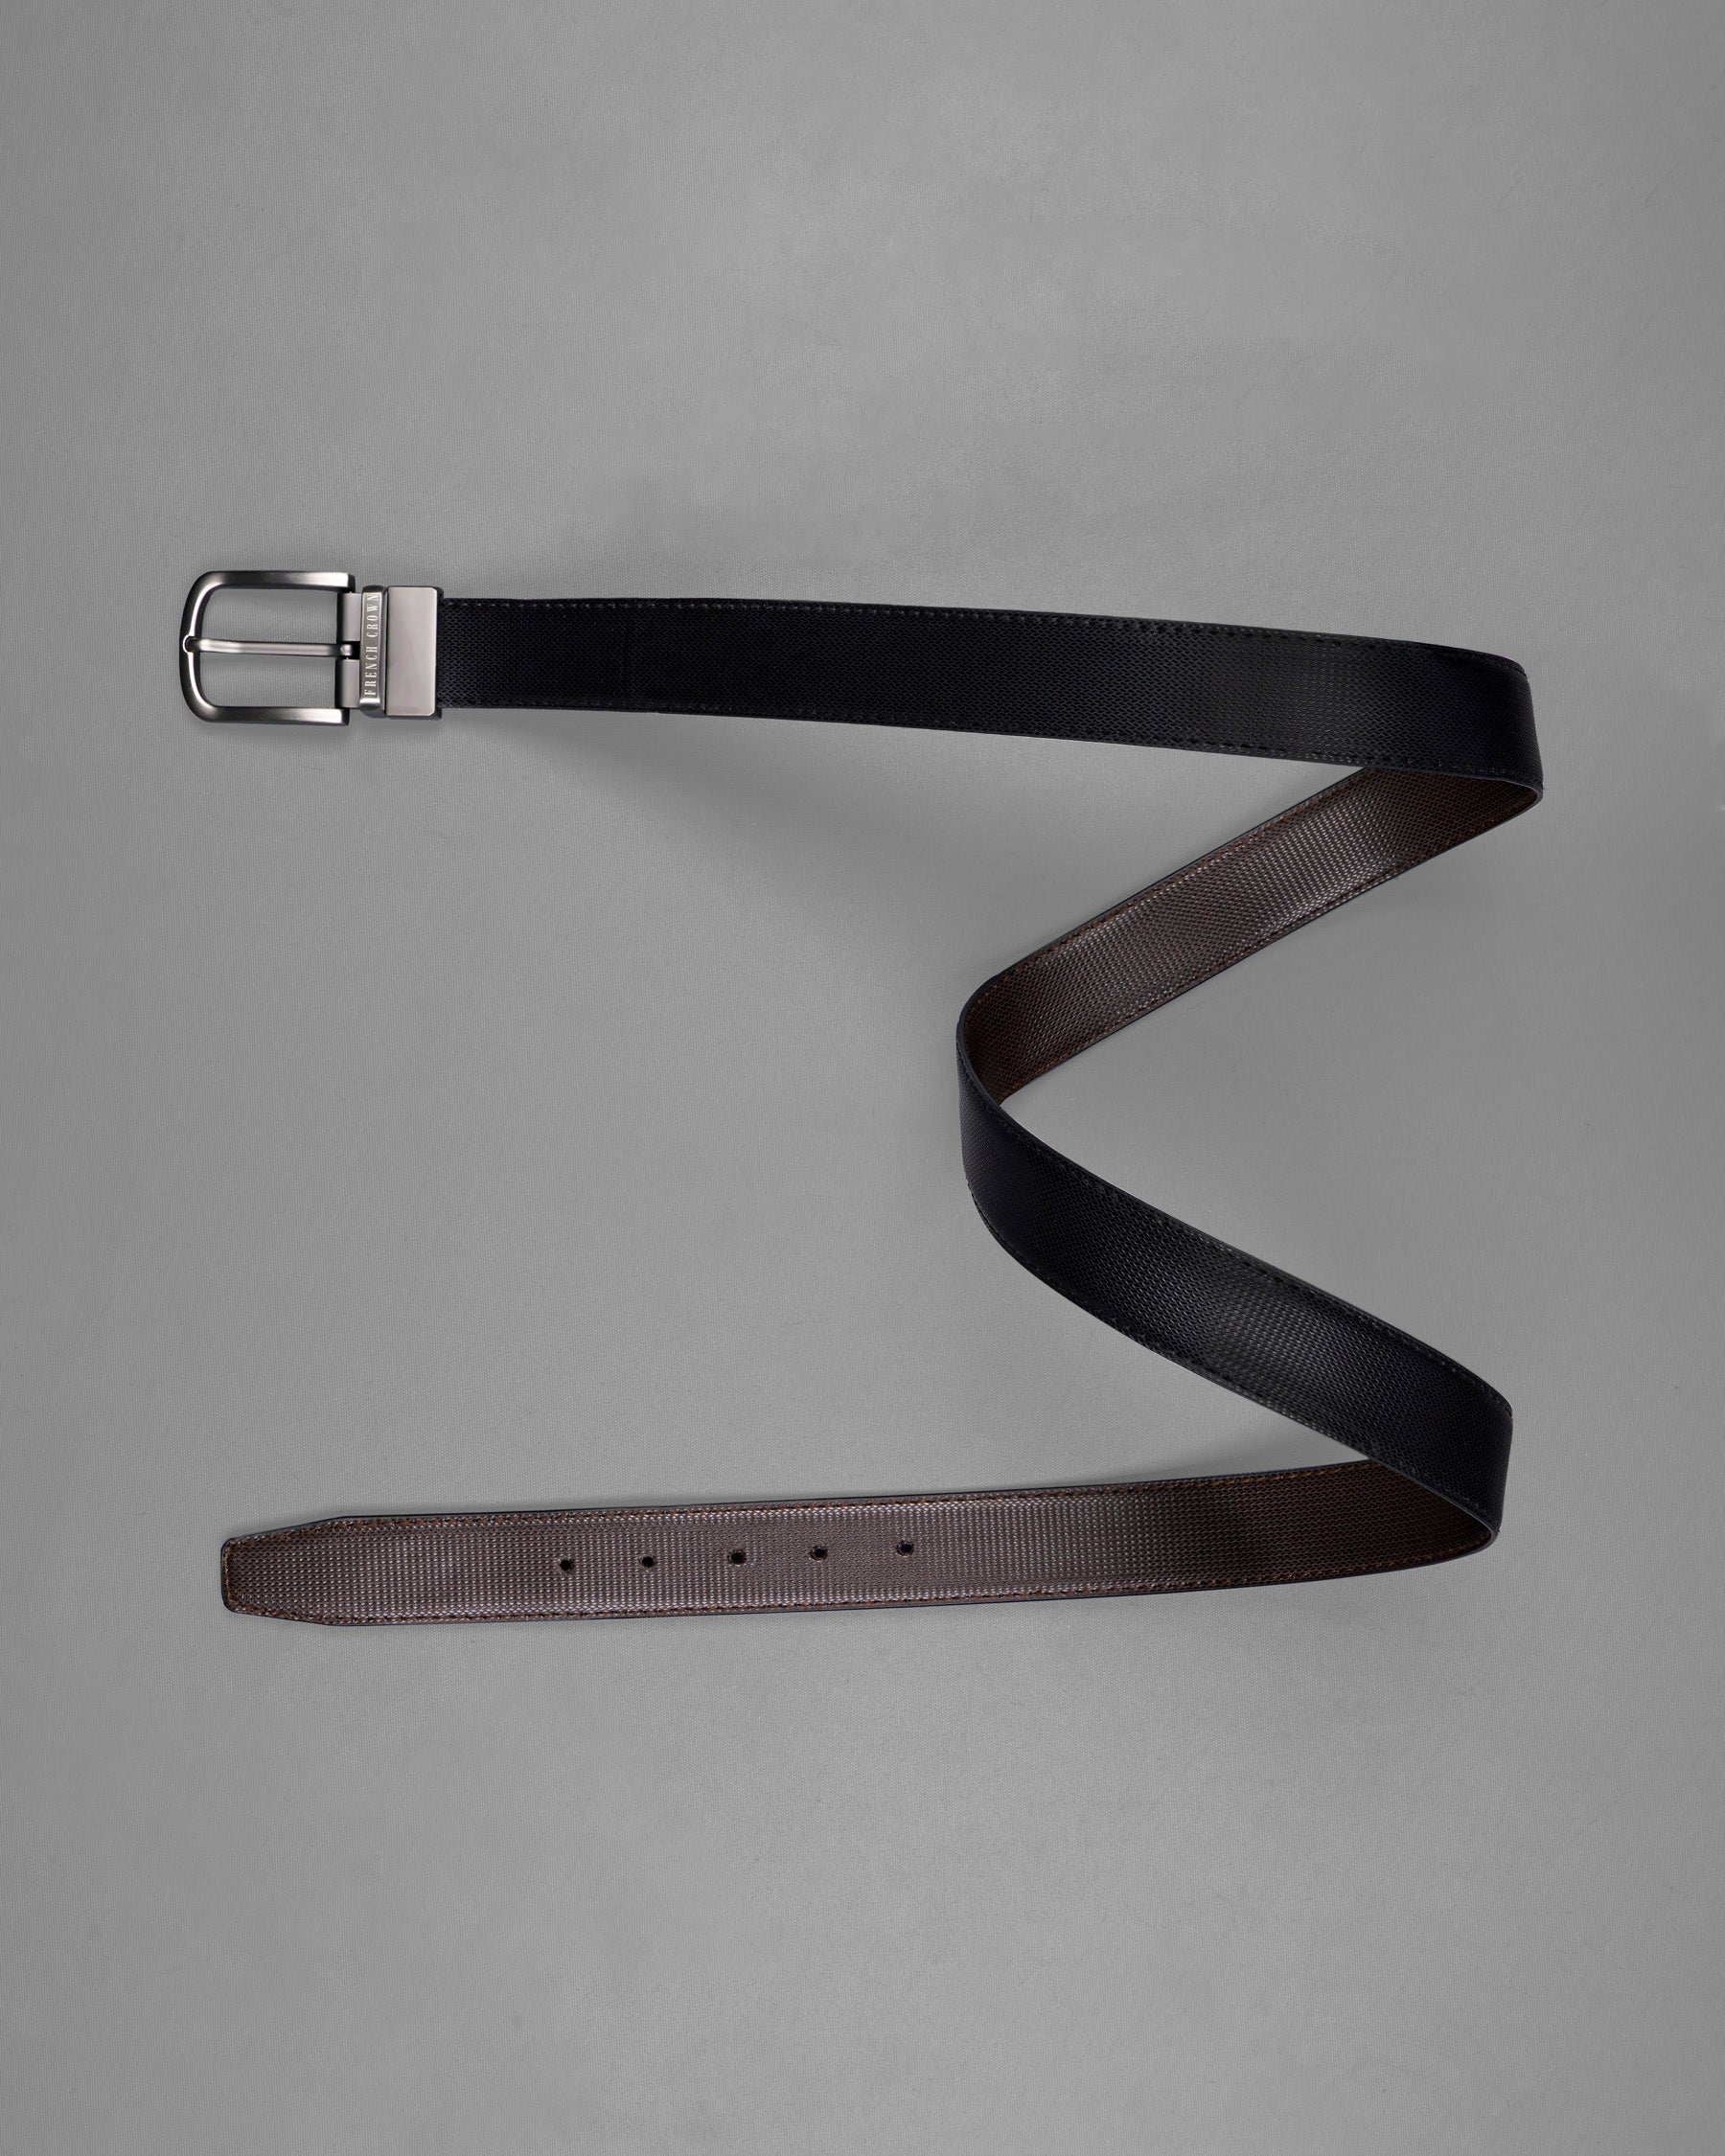 Silver Metallic Buckle Glossy Finish with Jade Black and Brown Leather Free Handcrafted Reversible Belt BT055-28, BT055-30, BT055-32, BT055-34, BT055-36, BT055-38 